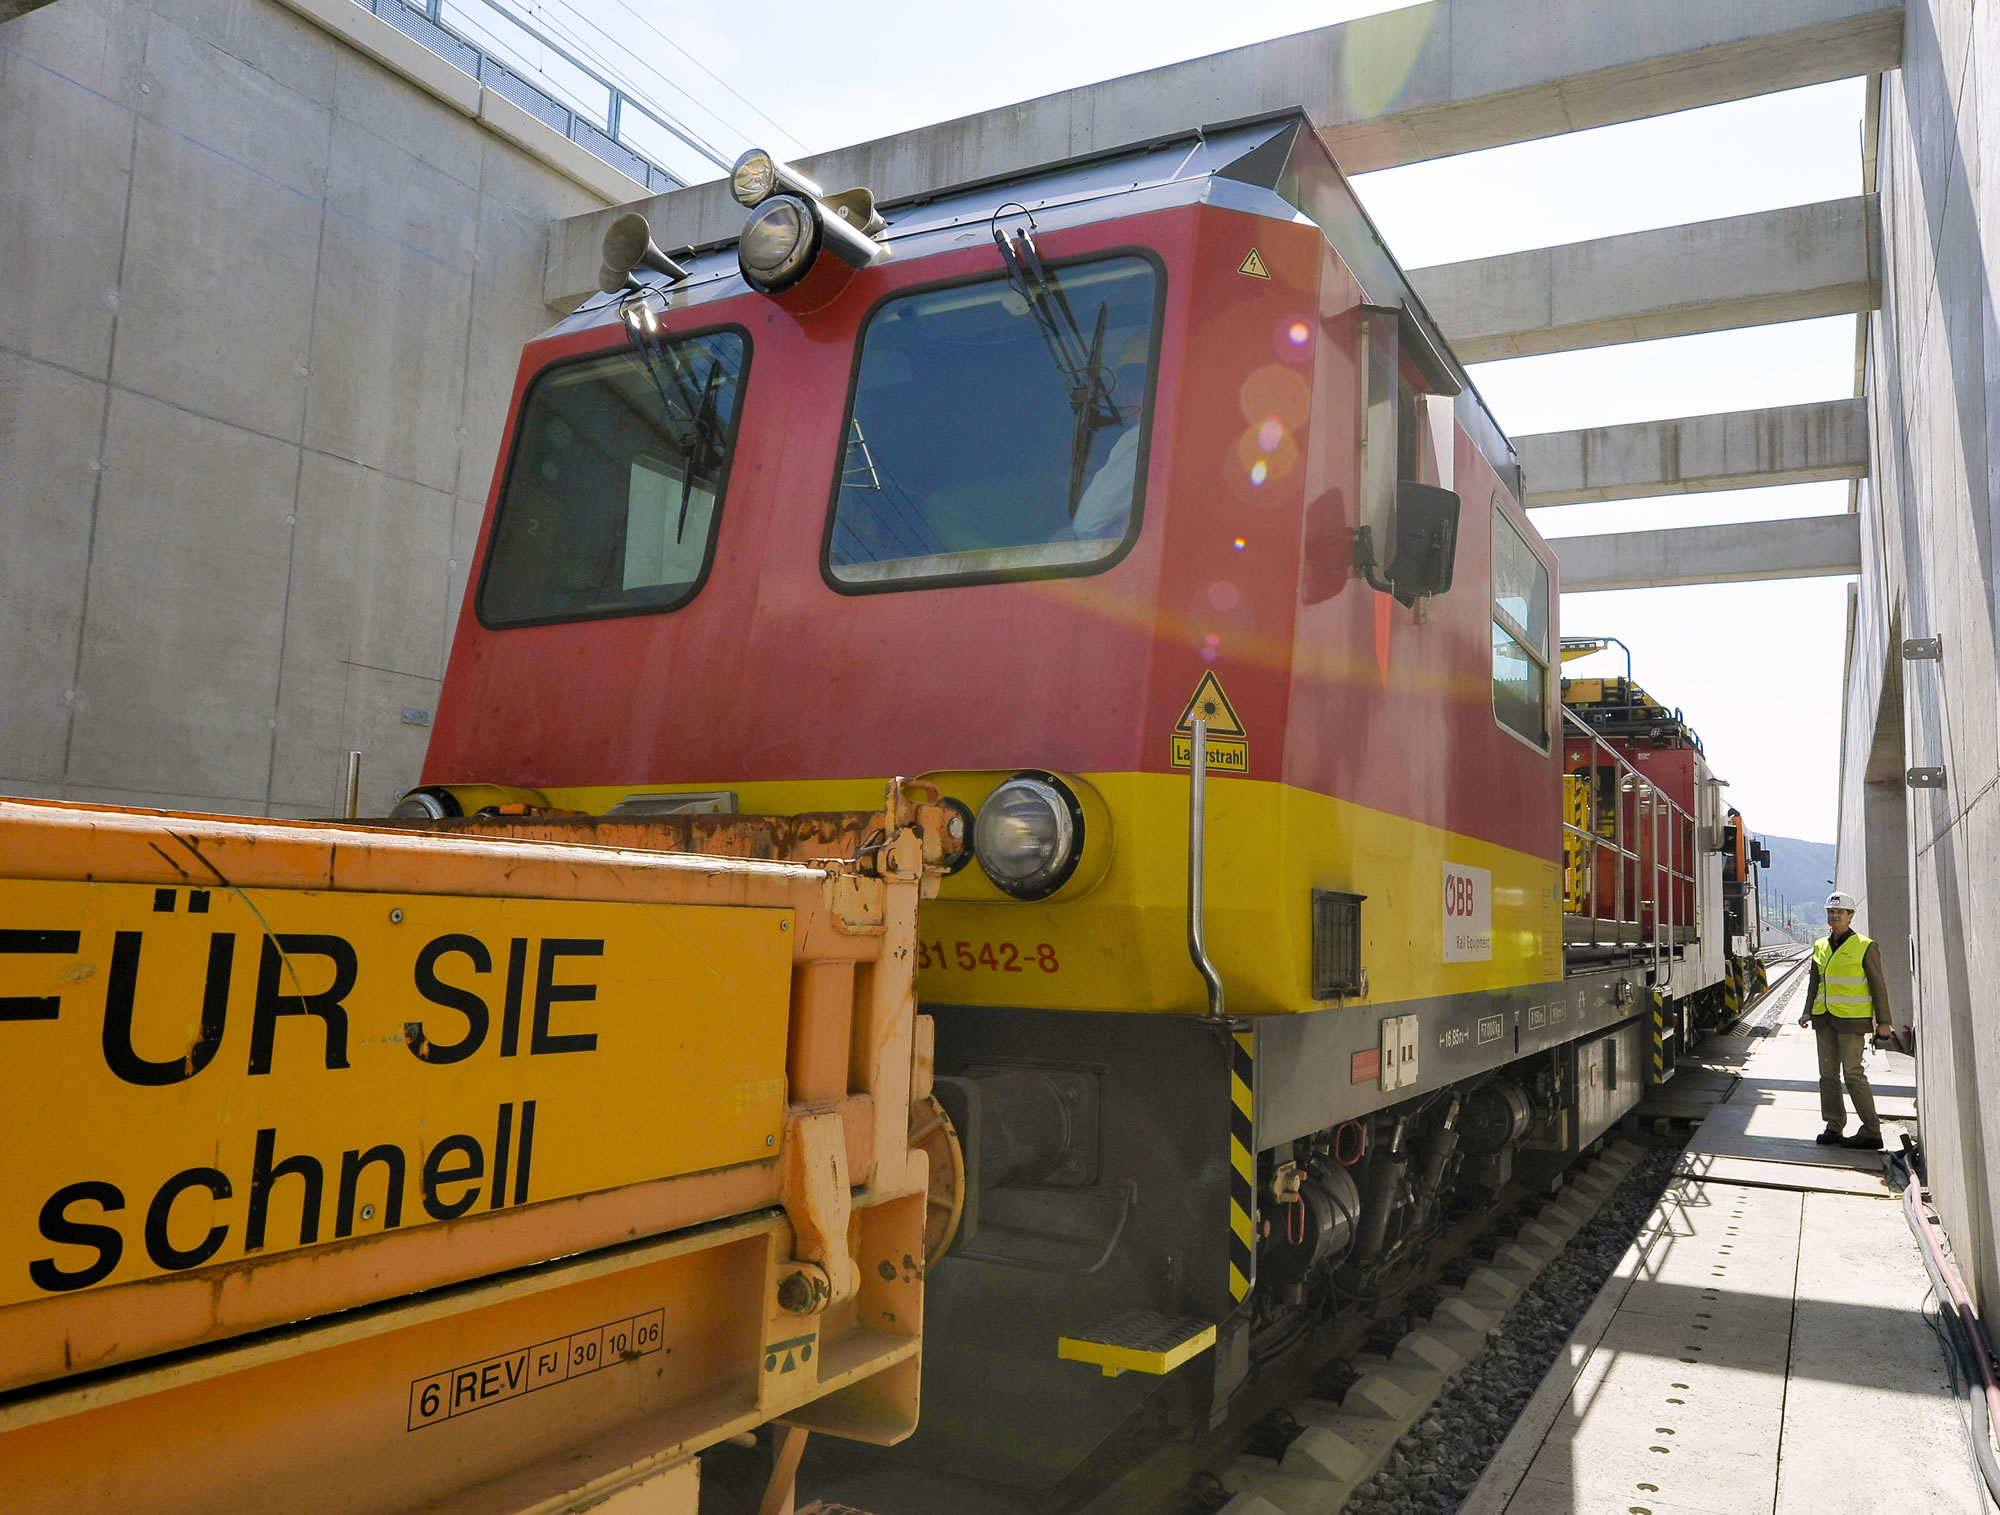 Close-up of a locomotive with a construction worker in safety equipment standing on the right-side platform, overseeing the locomotive.